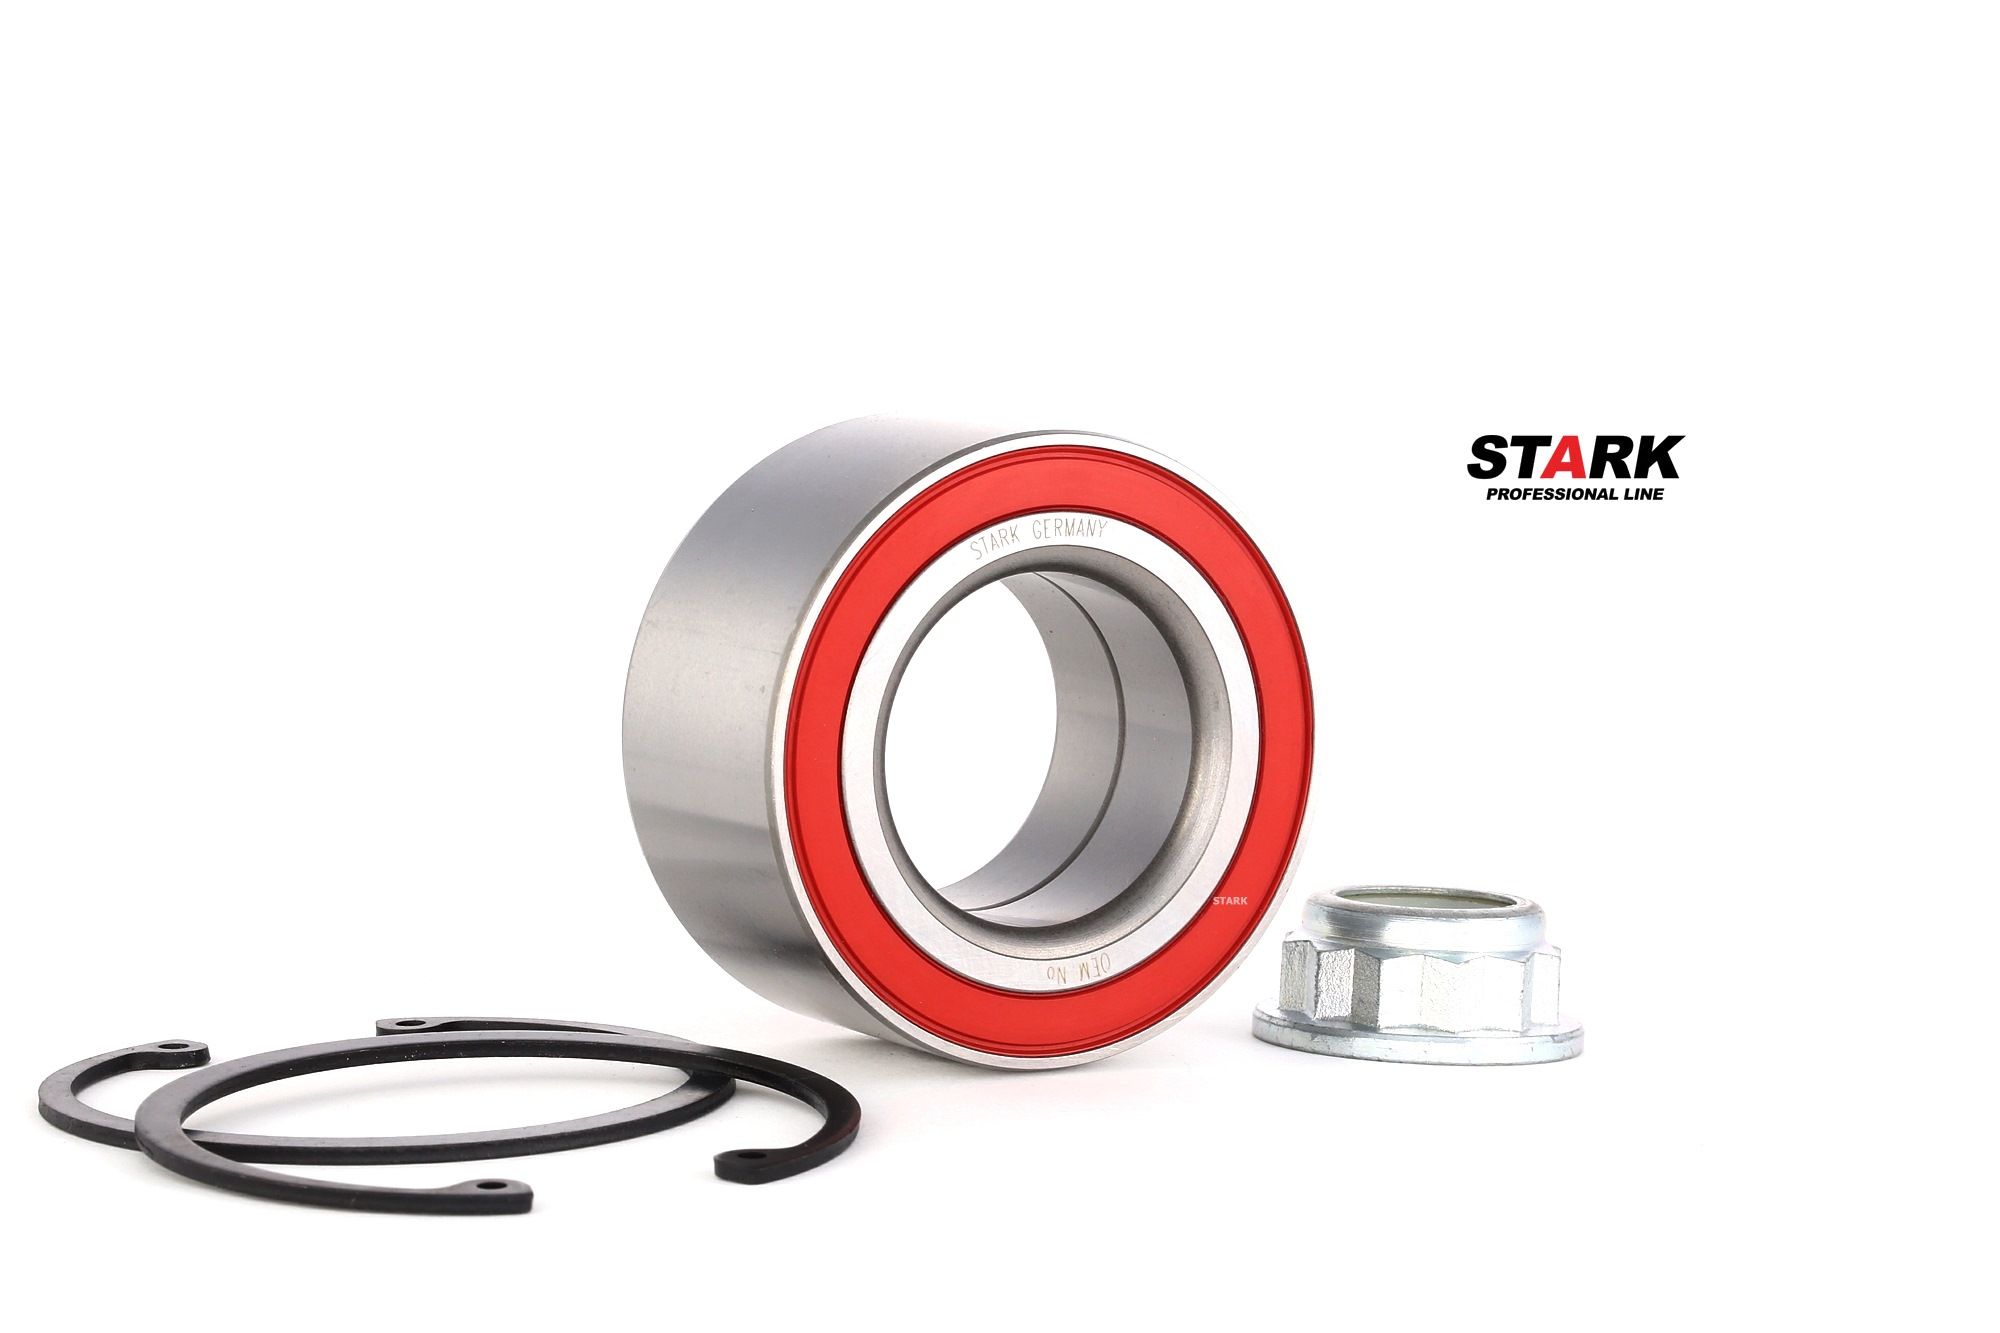 STARK SKWB-0180090 Wheel bearing kit Front axle both sides, without ABS sensor ring, 72,1 mm